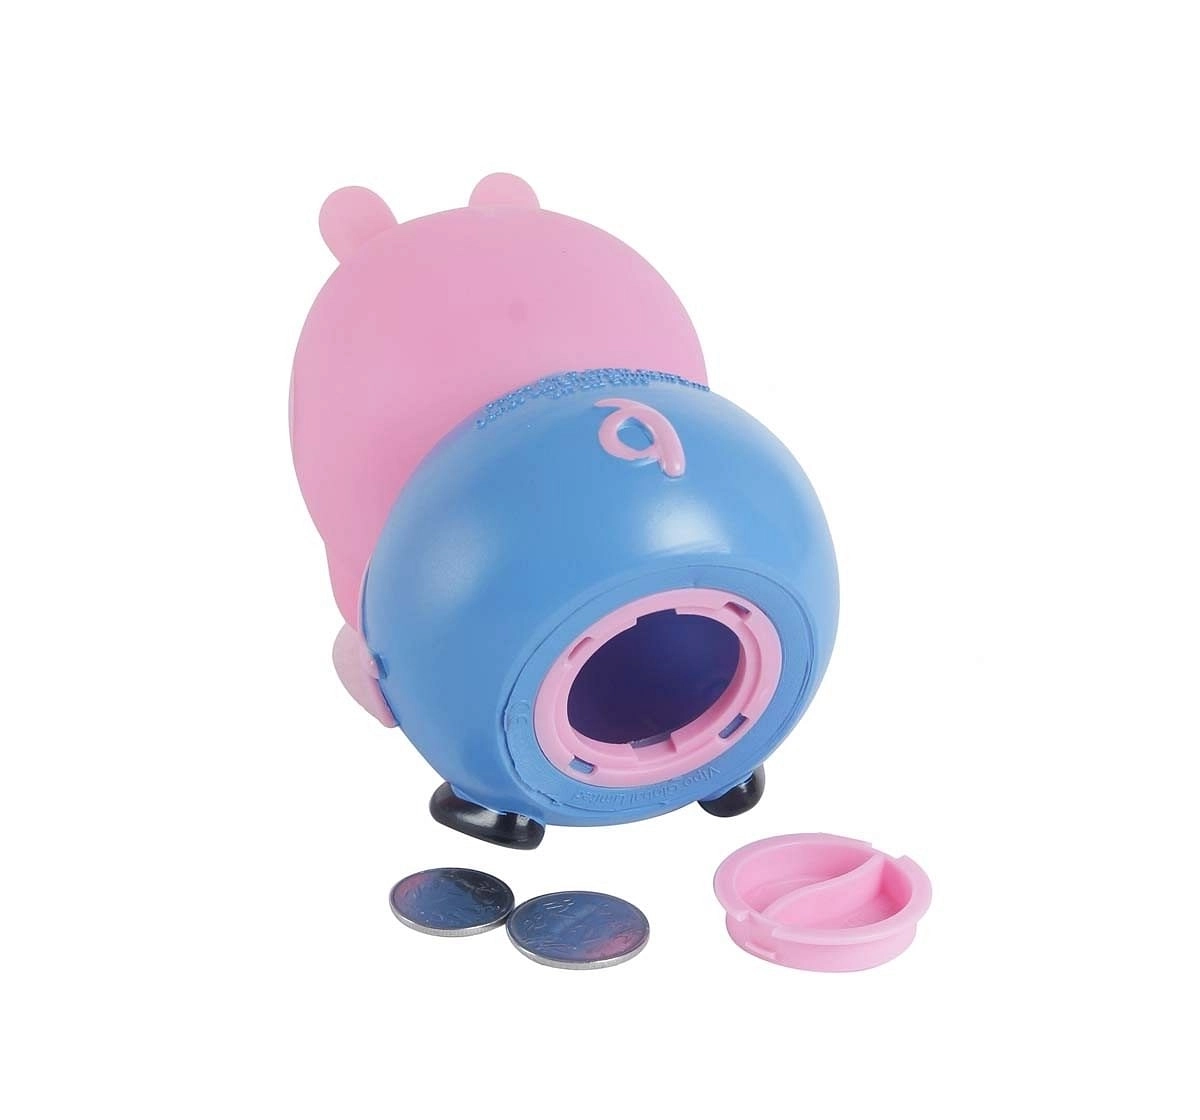 Peppa Pig George Coin Bank Novelty for Kids Age 3Y+